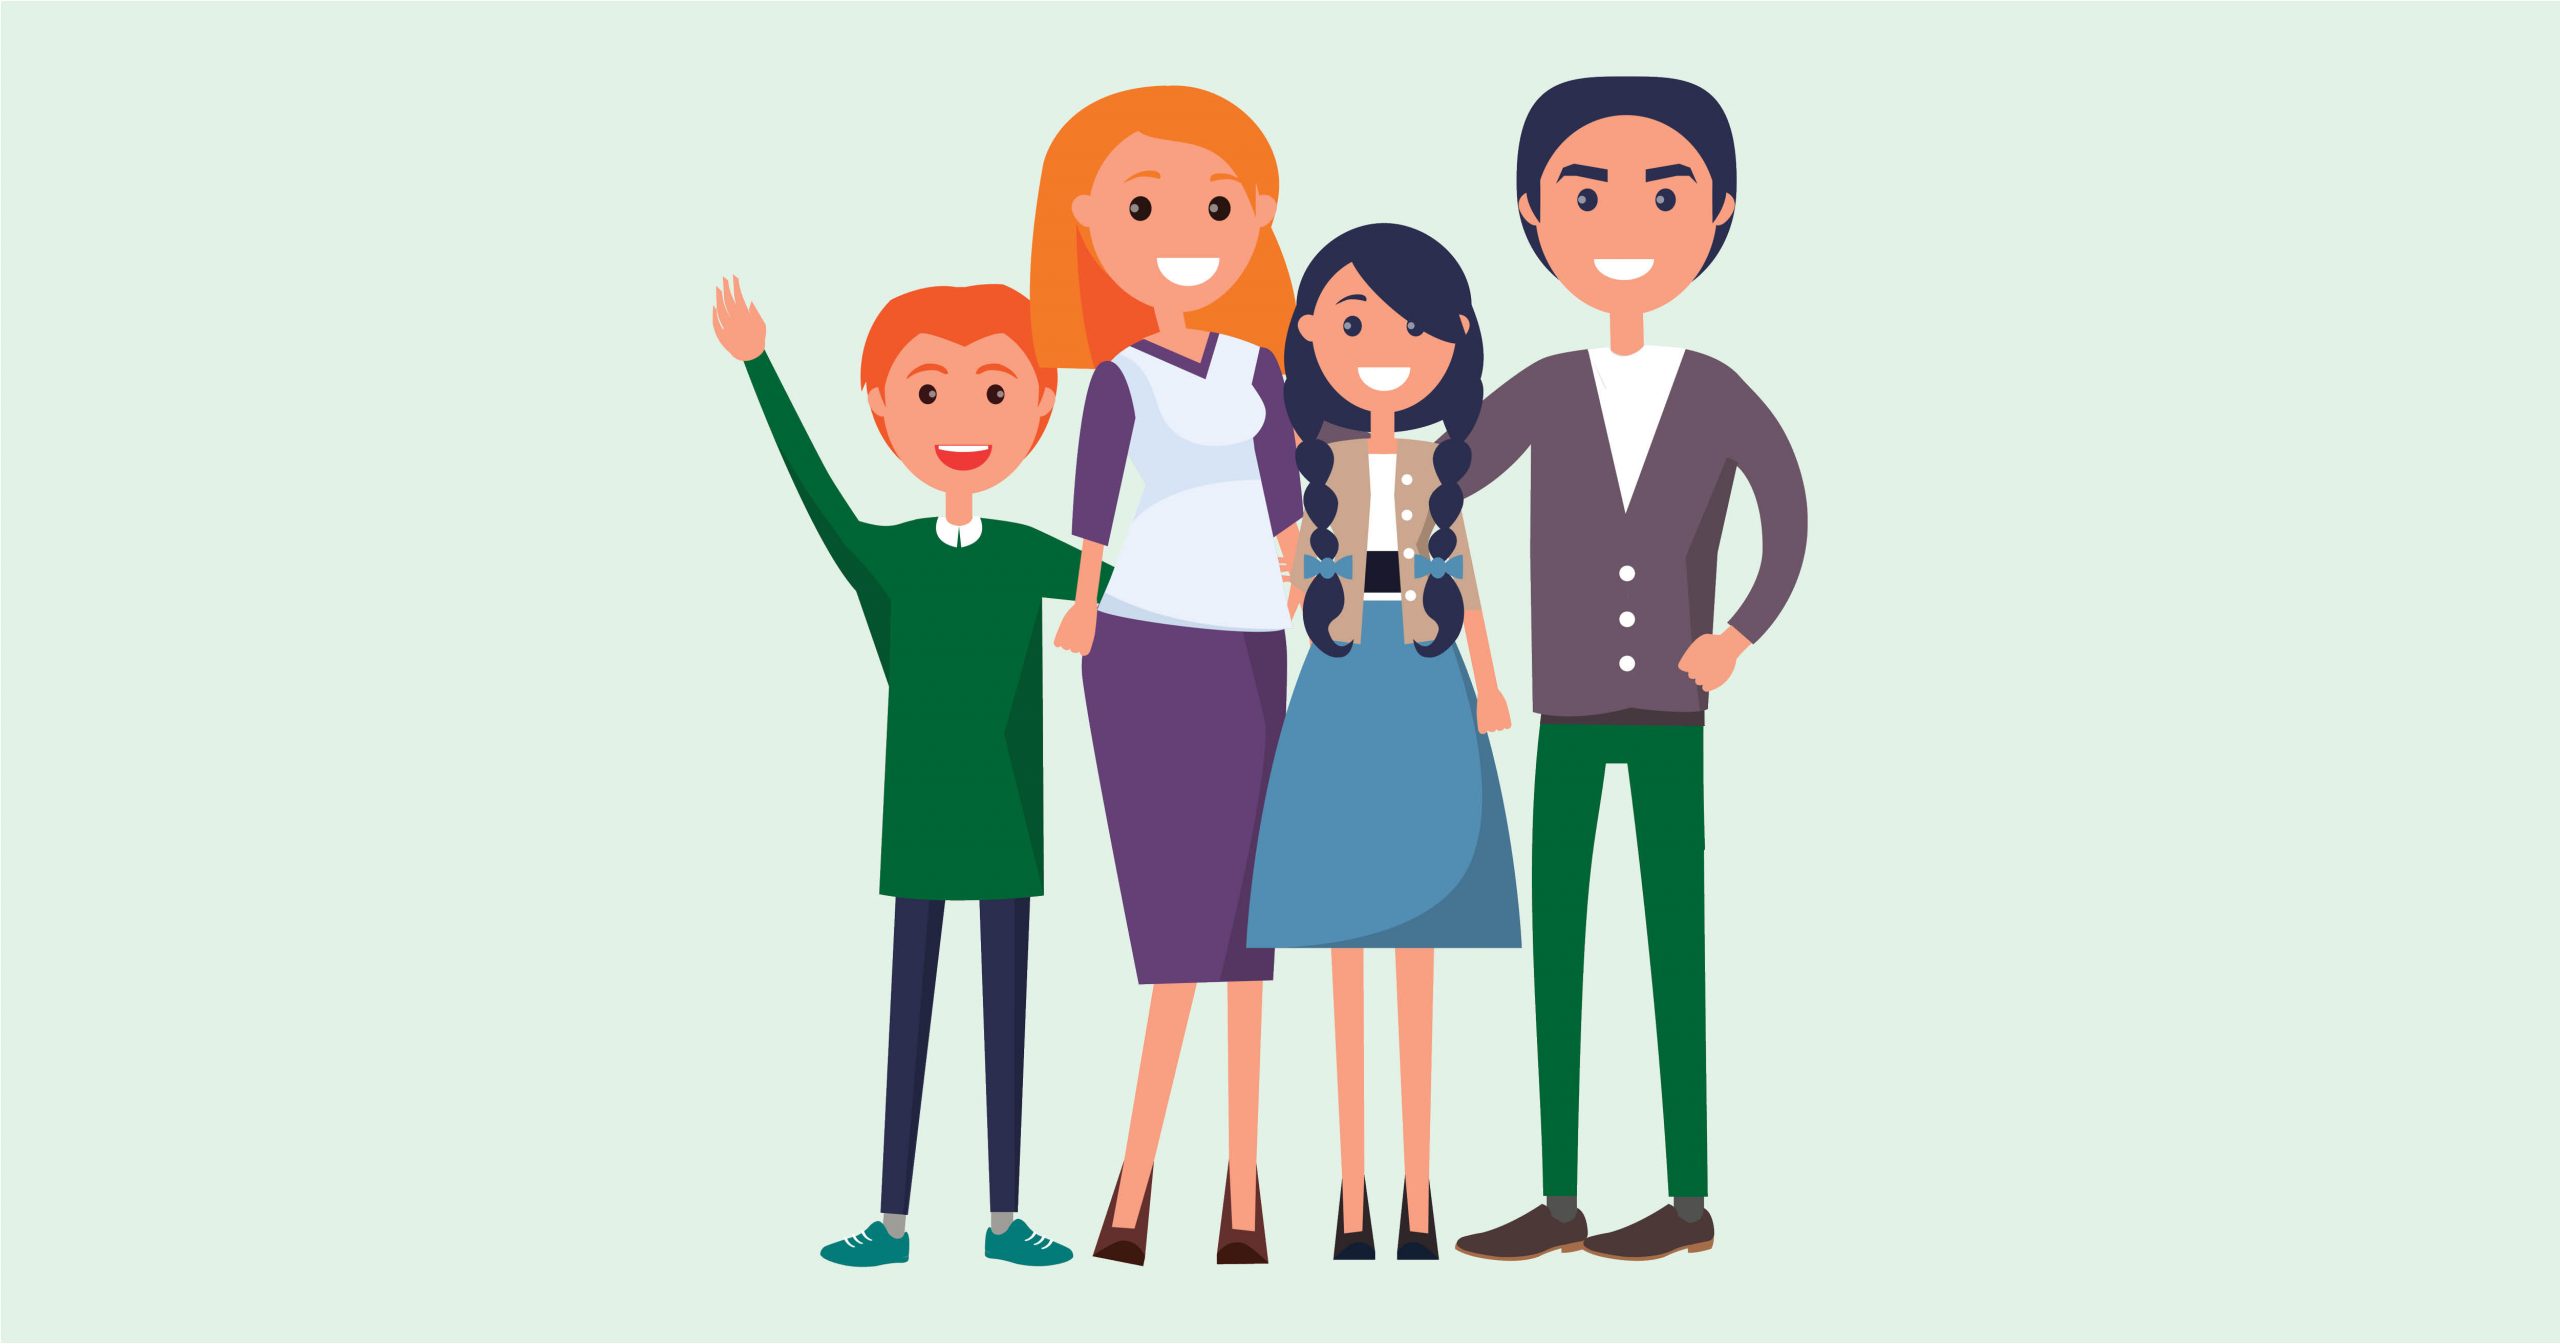 An illustration of a family of four. They are standing side by side. From left to right, a boy with orange hair, a woman who also has orange hair, a teen girl with dark braids and a man who also has dark hair.